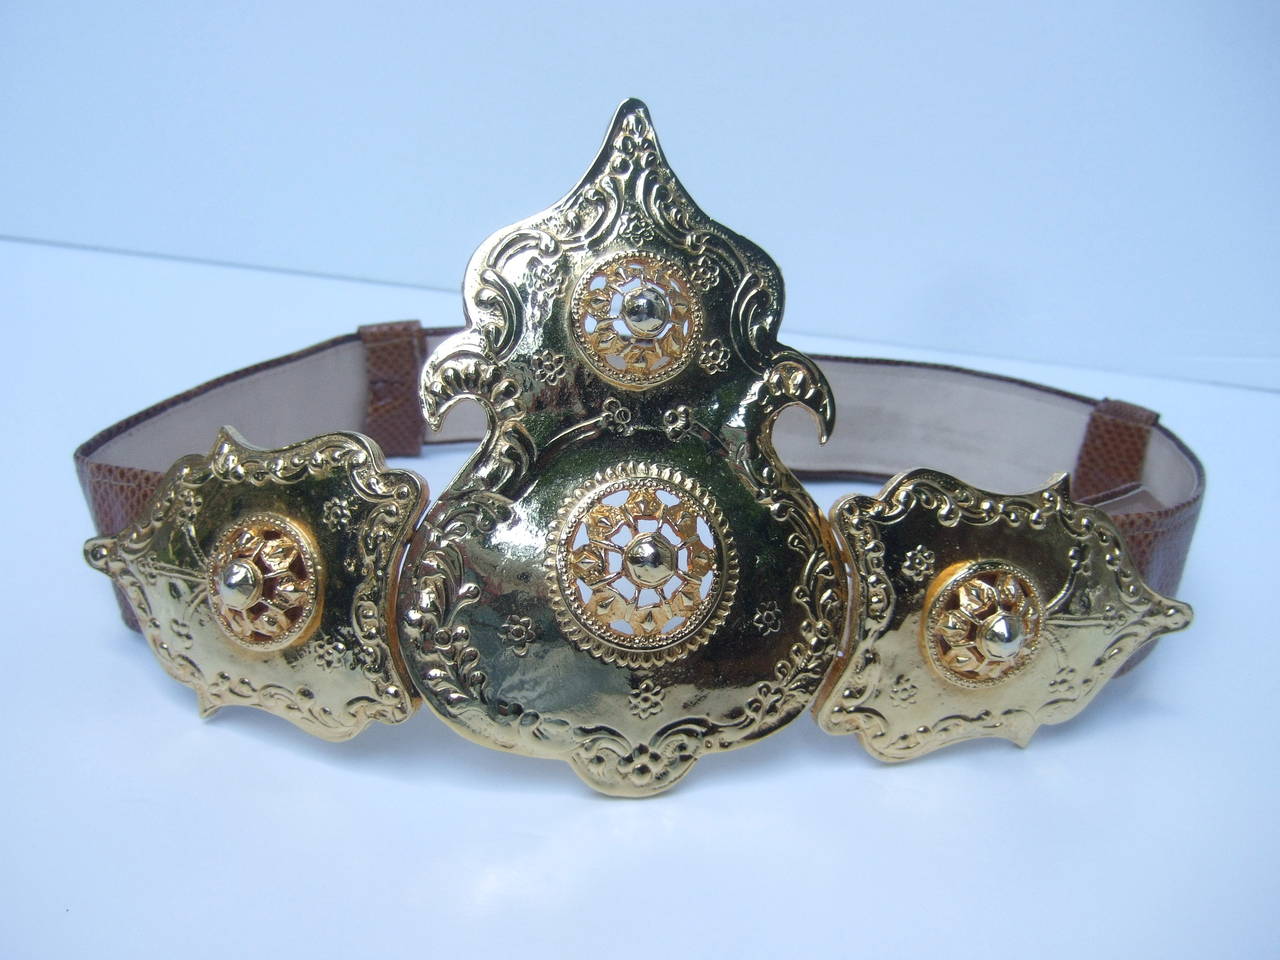 ALEXIS KIRK Massive ornate gilt metal buckle brown leather belt c 1980s
The designer belt is adorned with a huge gilt metal gladiator style buckle that is embellished with scrolled repousse designs 

The brown leather adjustable belt is designed